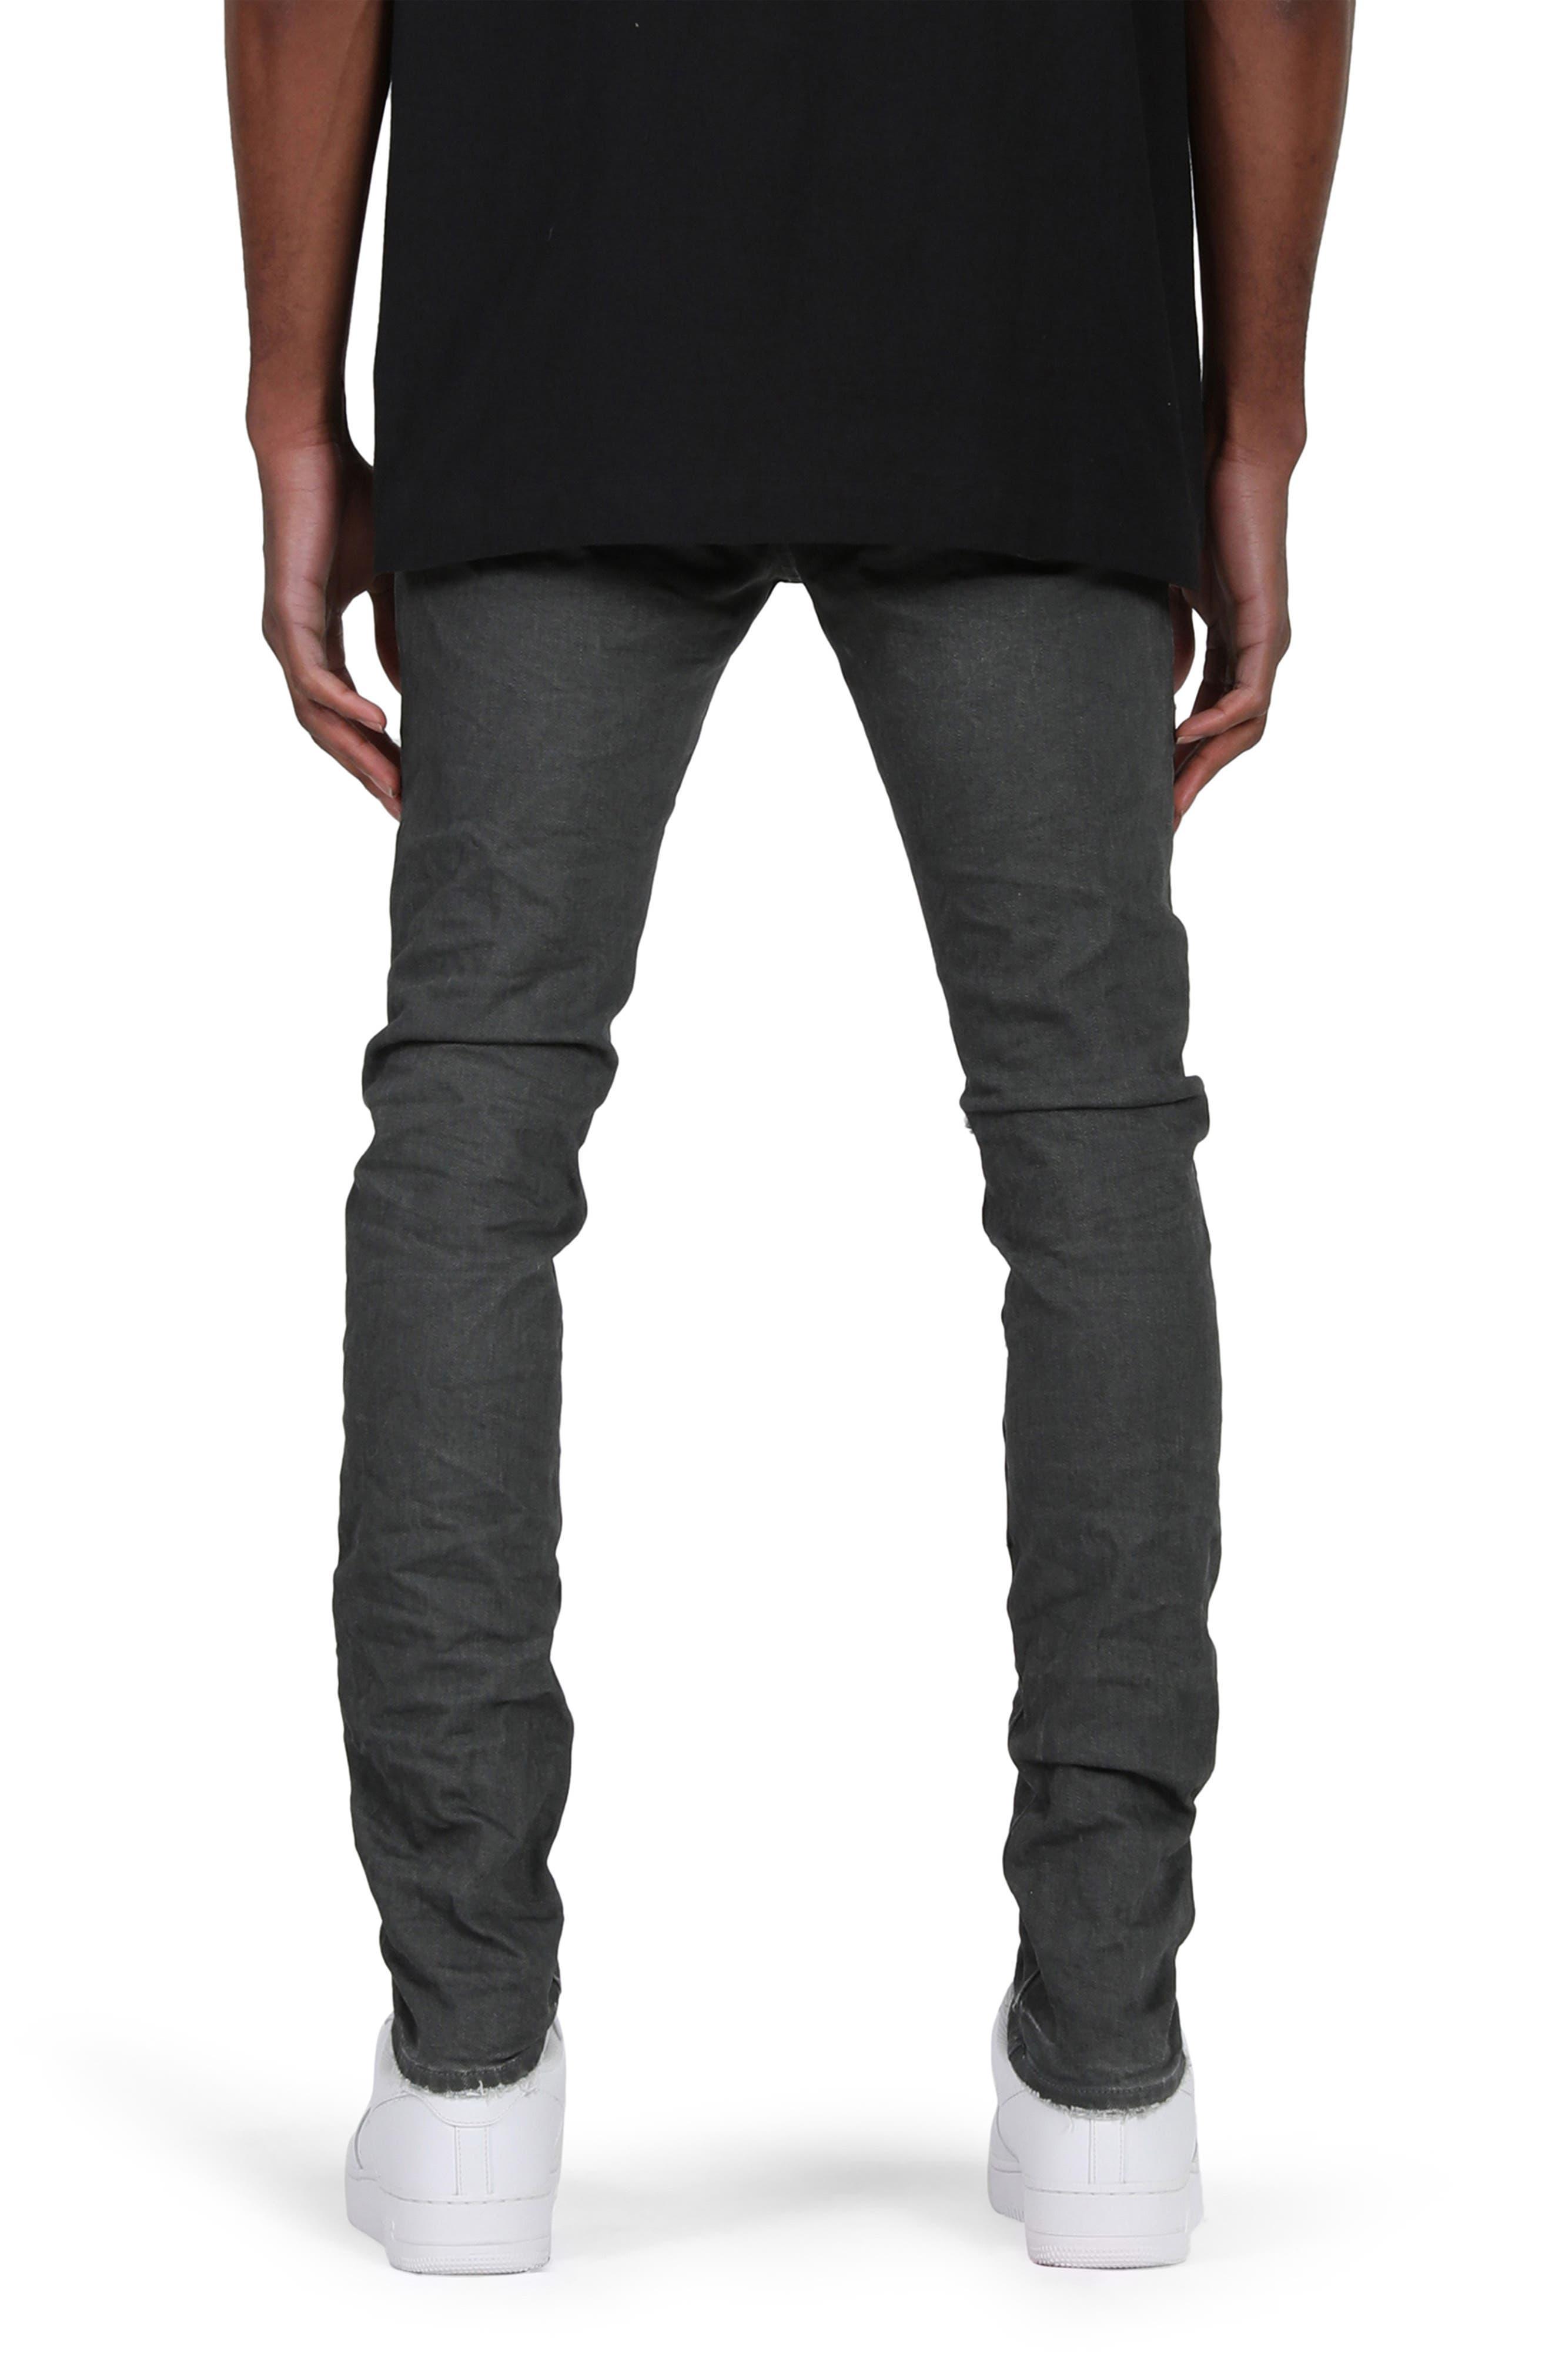 P001 Low Rise Skinny Jeans